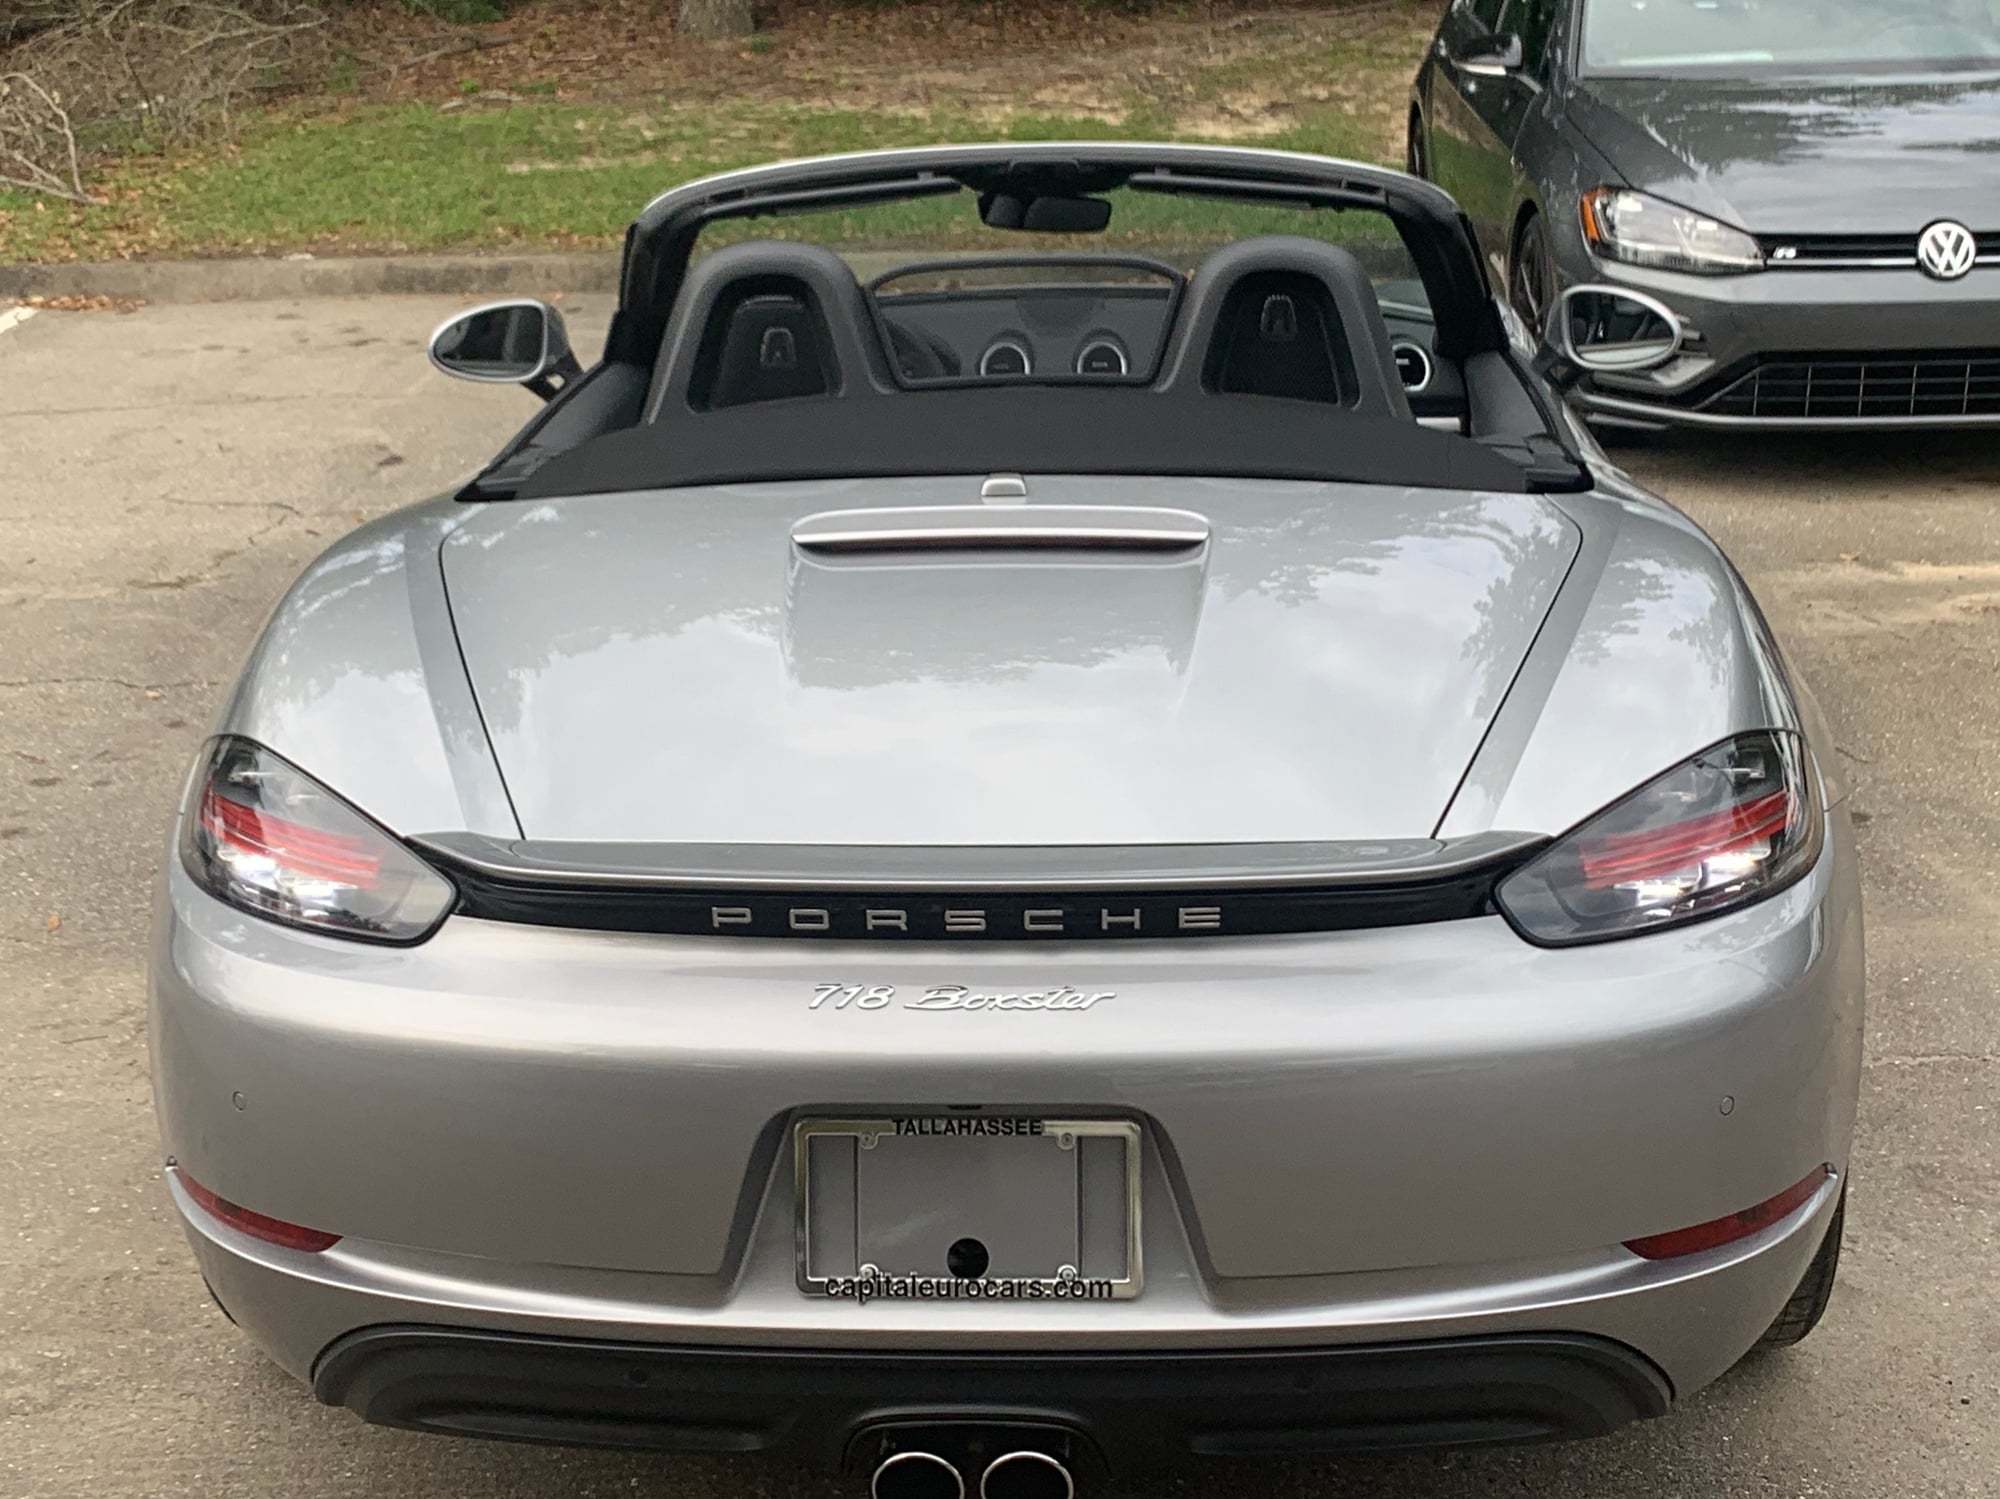 2018 Porsche 718 Boxster - 2018 718 Boxster Manual transmission in Excellent condition 2700 miles CPO - Used - VIN WP0CA2A80JS210260 - 2,671 Miles - 4 cyl - 2WD - Manual - Convertible - Silver - Tallahassee, FL 32304, United States